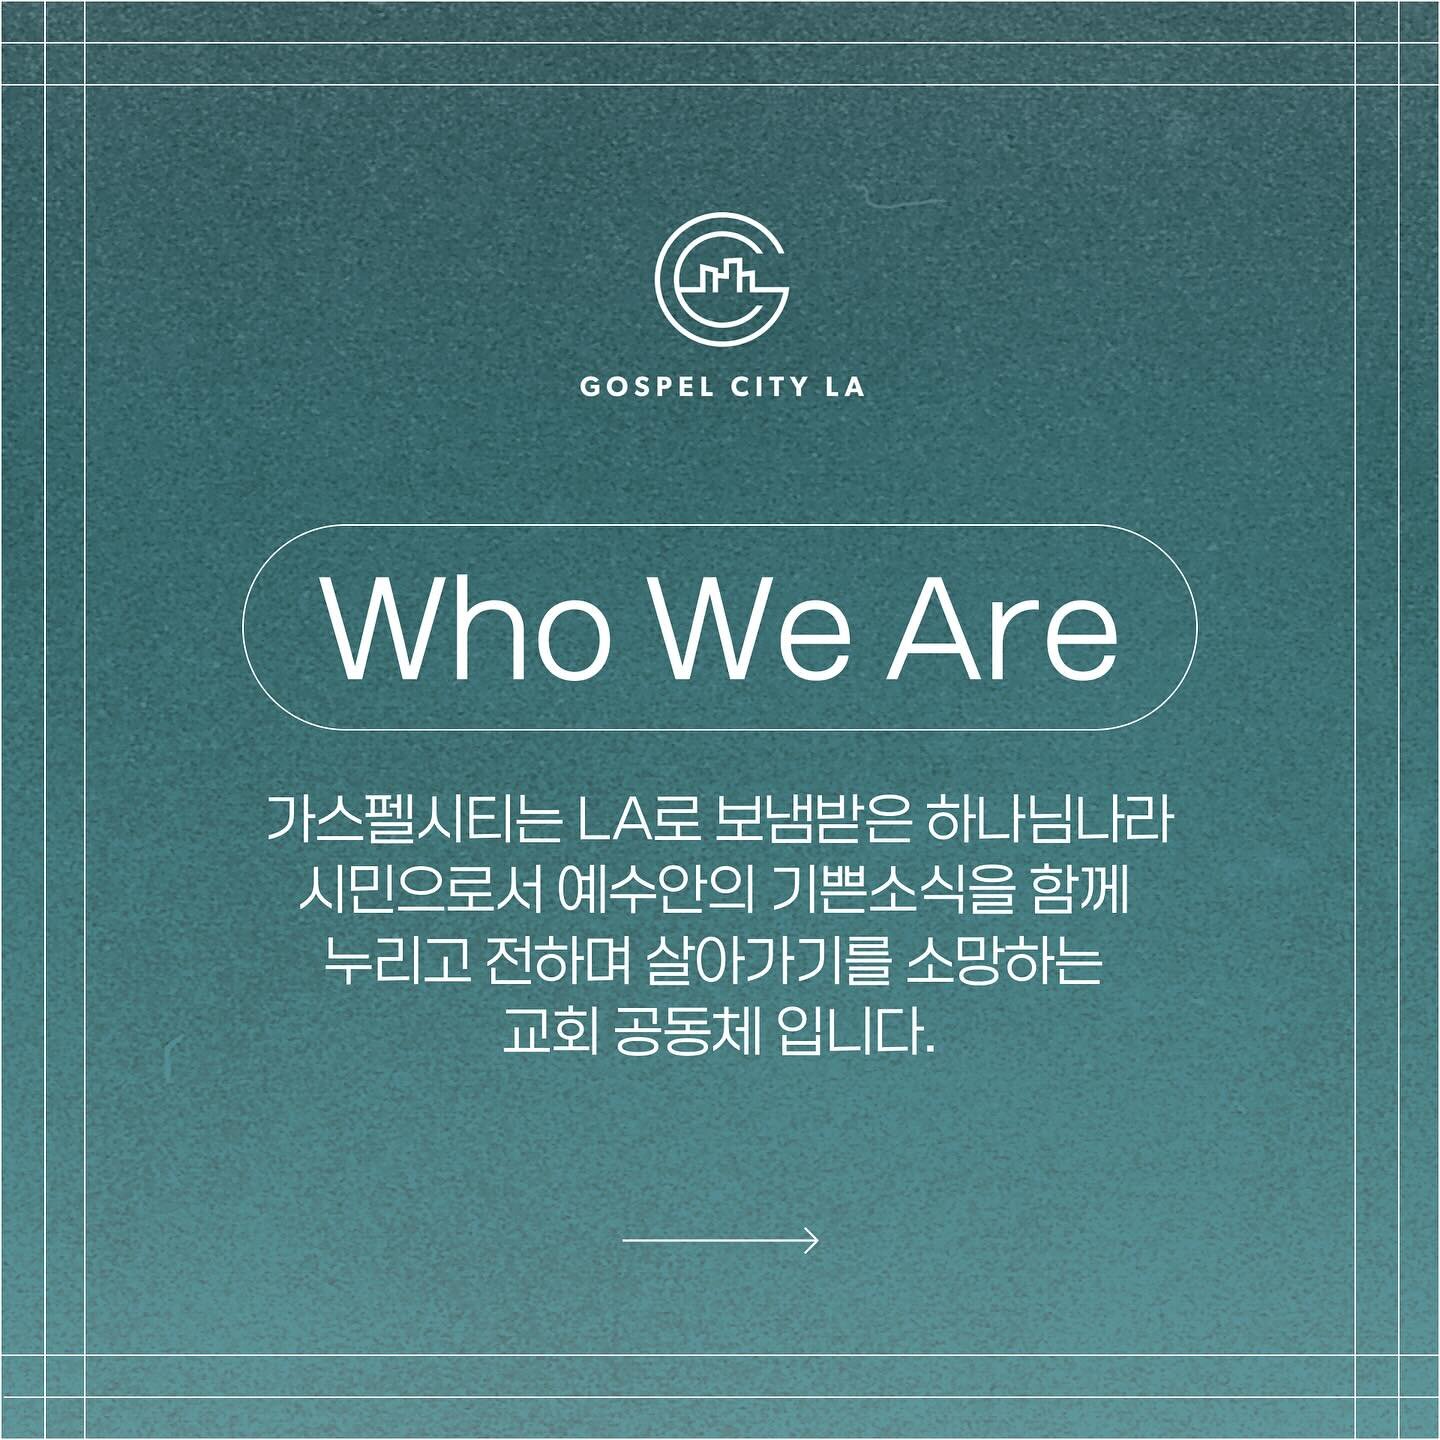 We believe &lsquo;Who We Are&rsquo; as a church determines &lsquo;Why&rsquo;, &lsquo;How&rsquo;, and &lsquo;What We Do&rsquo;. #gospelcityla